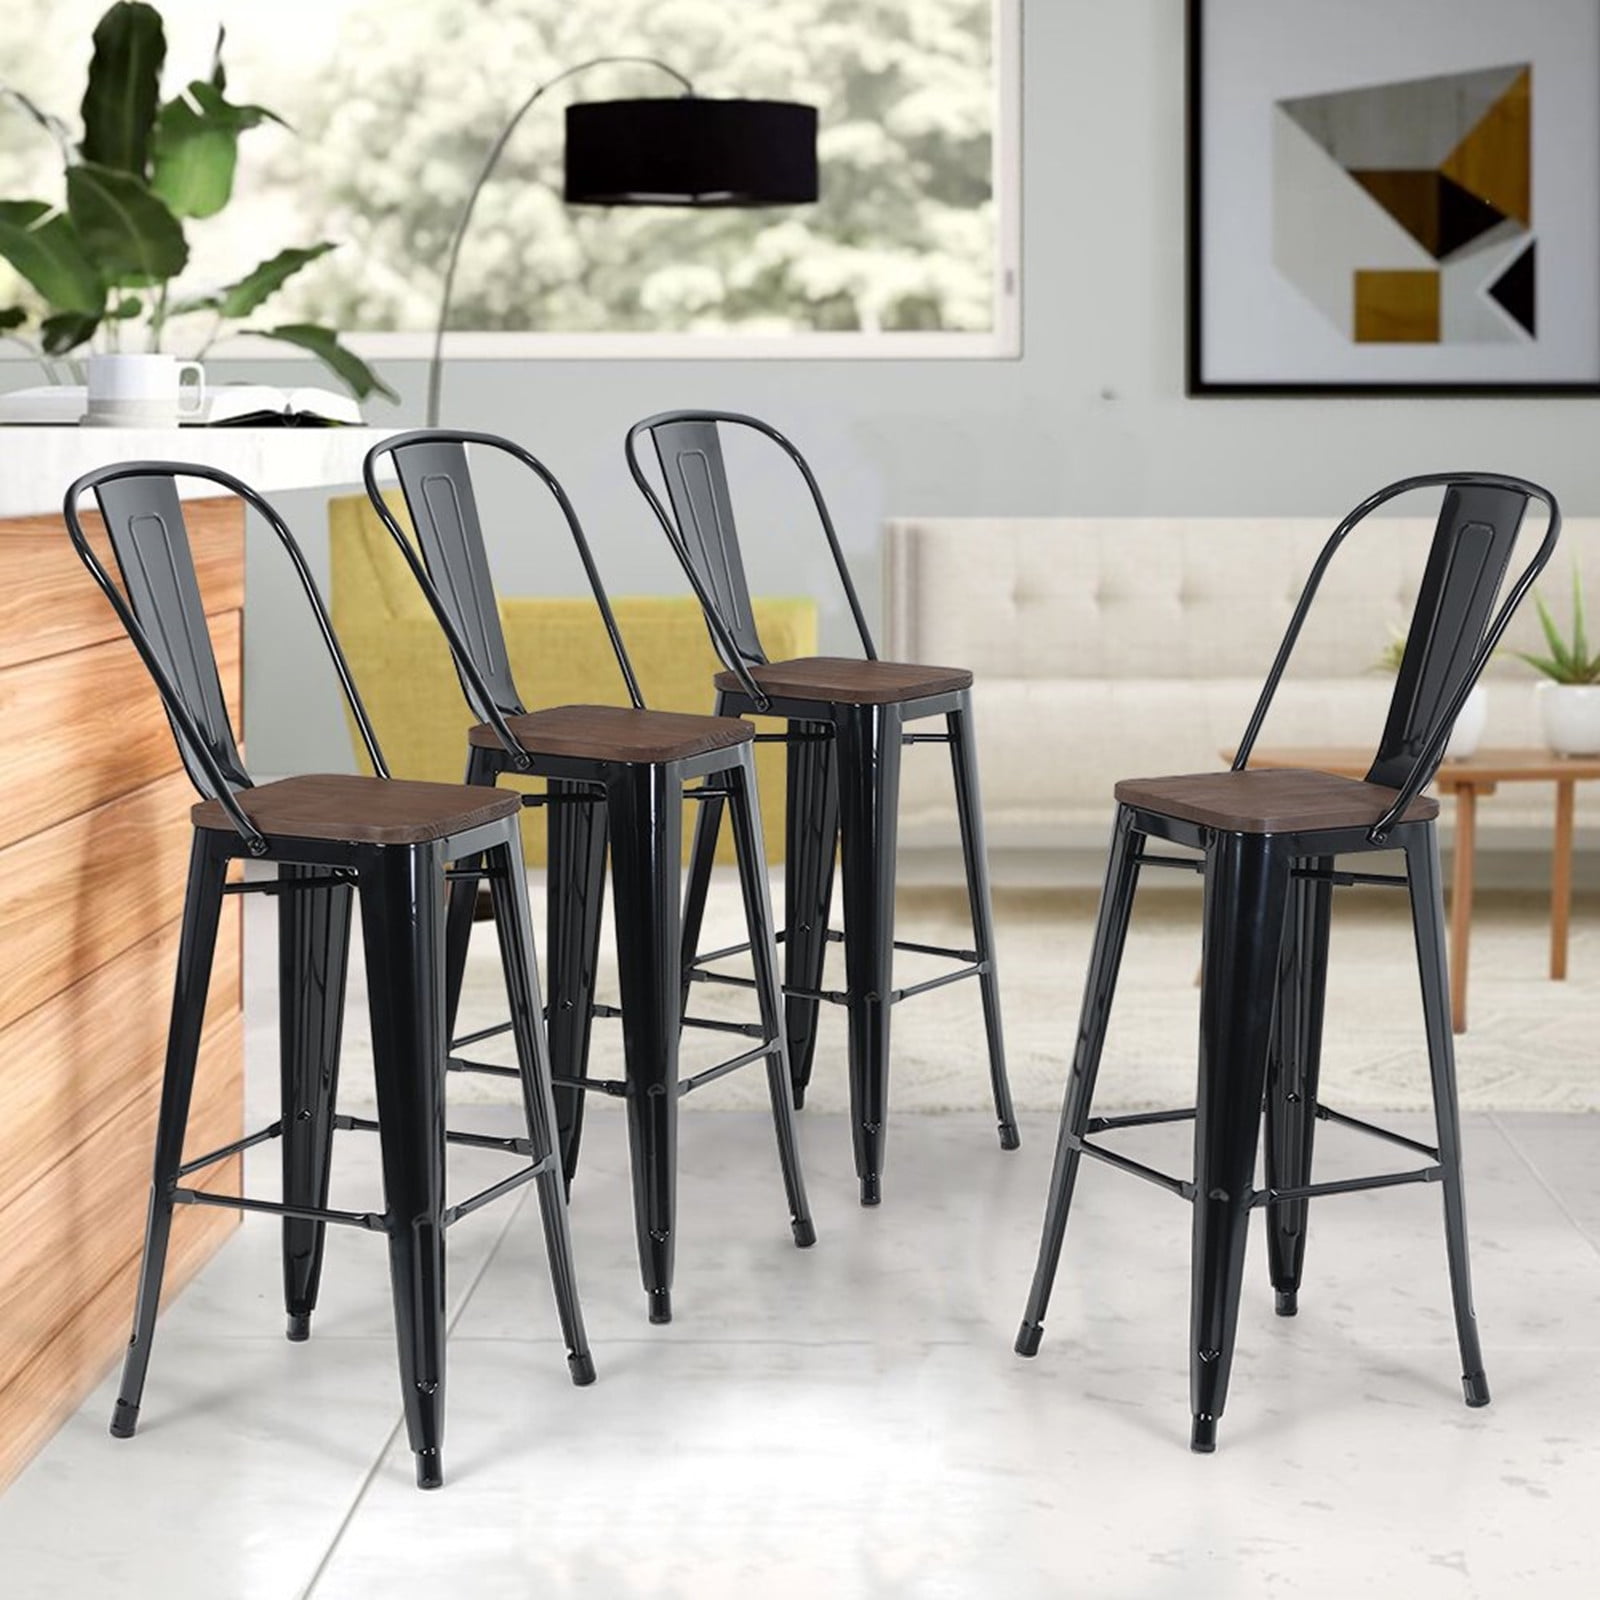 Metal Bar Stools Set of 4 Counter Stools 24 Inch Metal Bar Stools Kitchen Counter Height Barstools Stackable Barstools Indoor Outdoor Patio Bar Set Home Kitchen Dining Chair Black